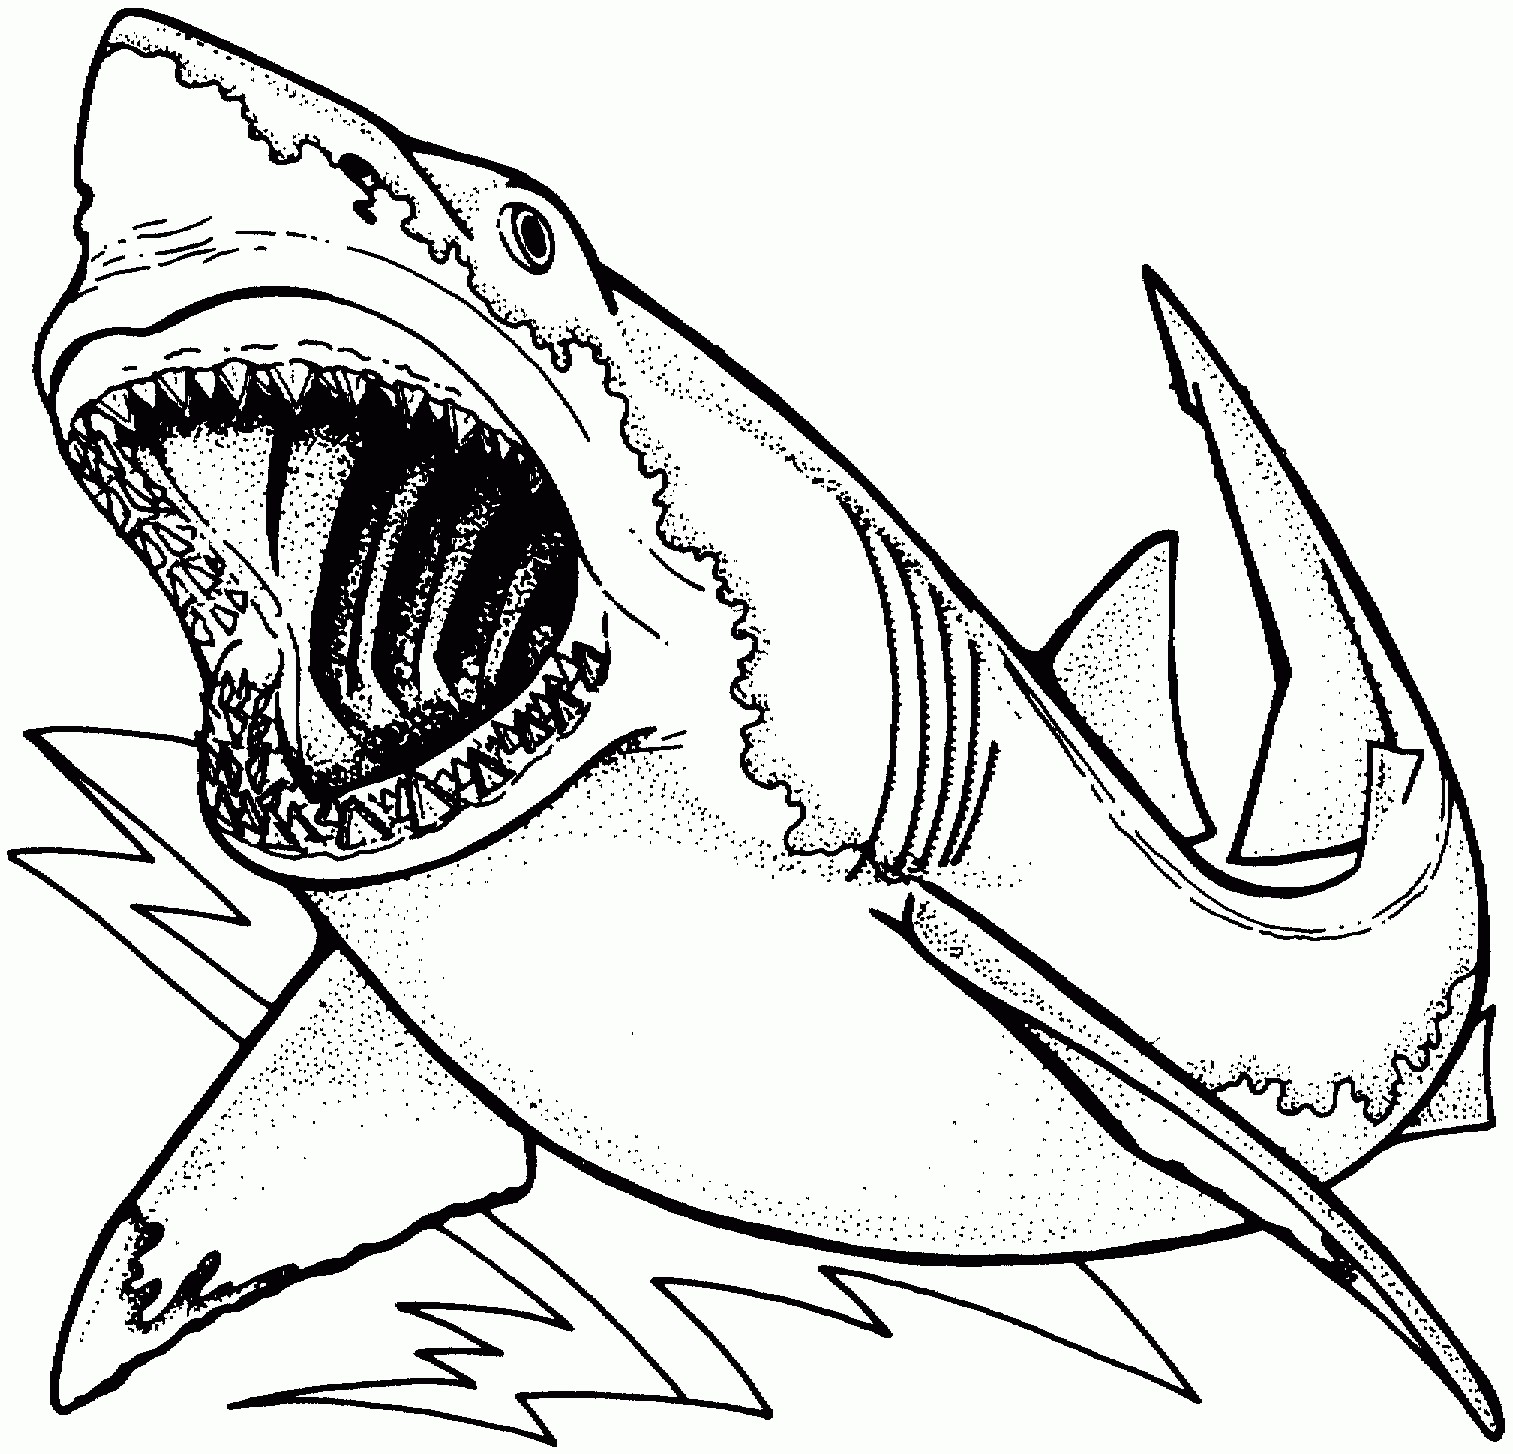 Awesome Great White Shark Coloring Page - Free Printable ...